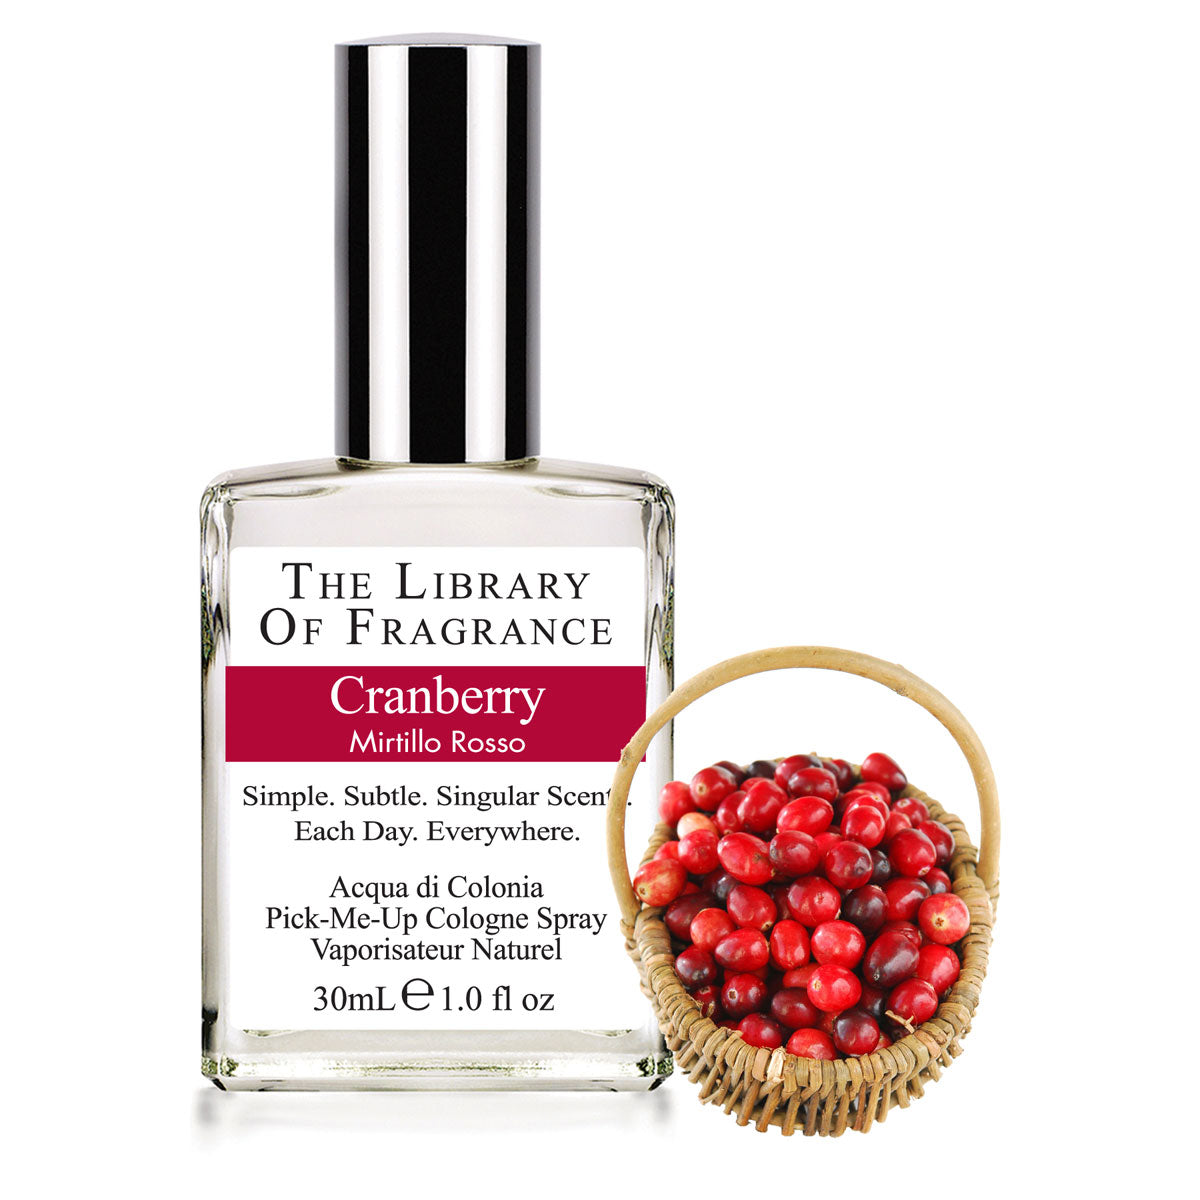 The Library Of Fragrance Cranberry 30ml Cologne AKA Demeter Fragrance